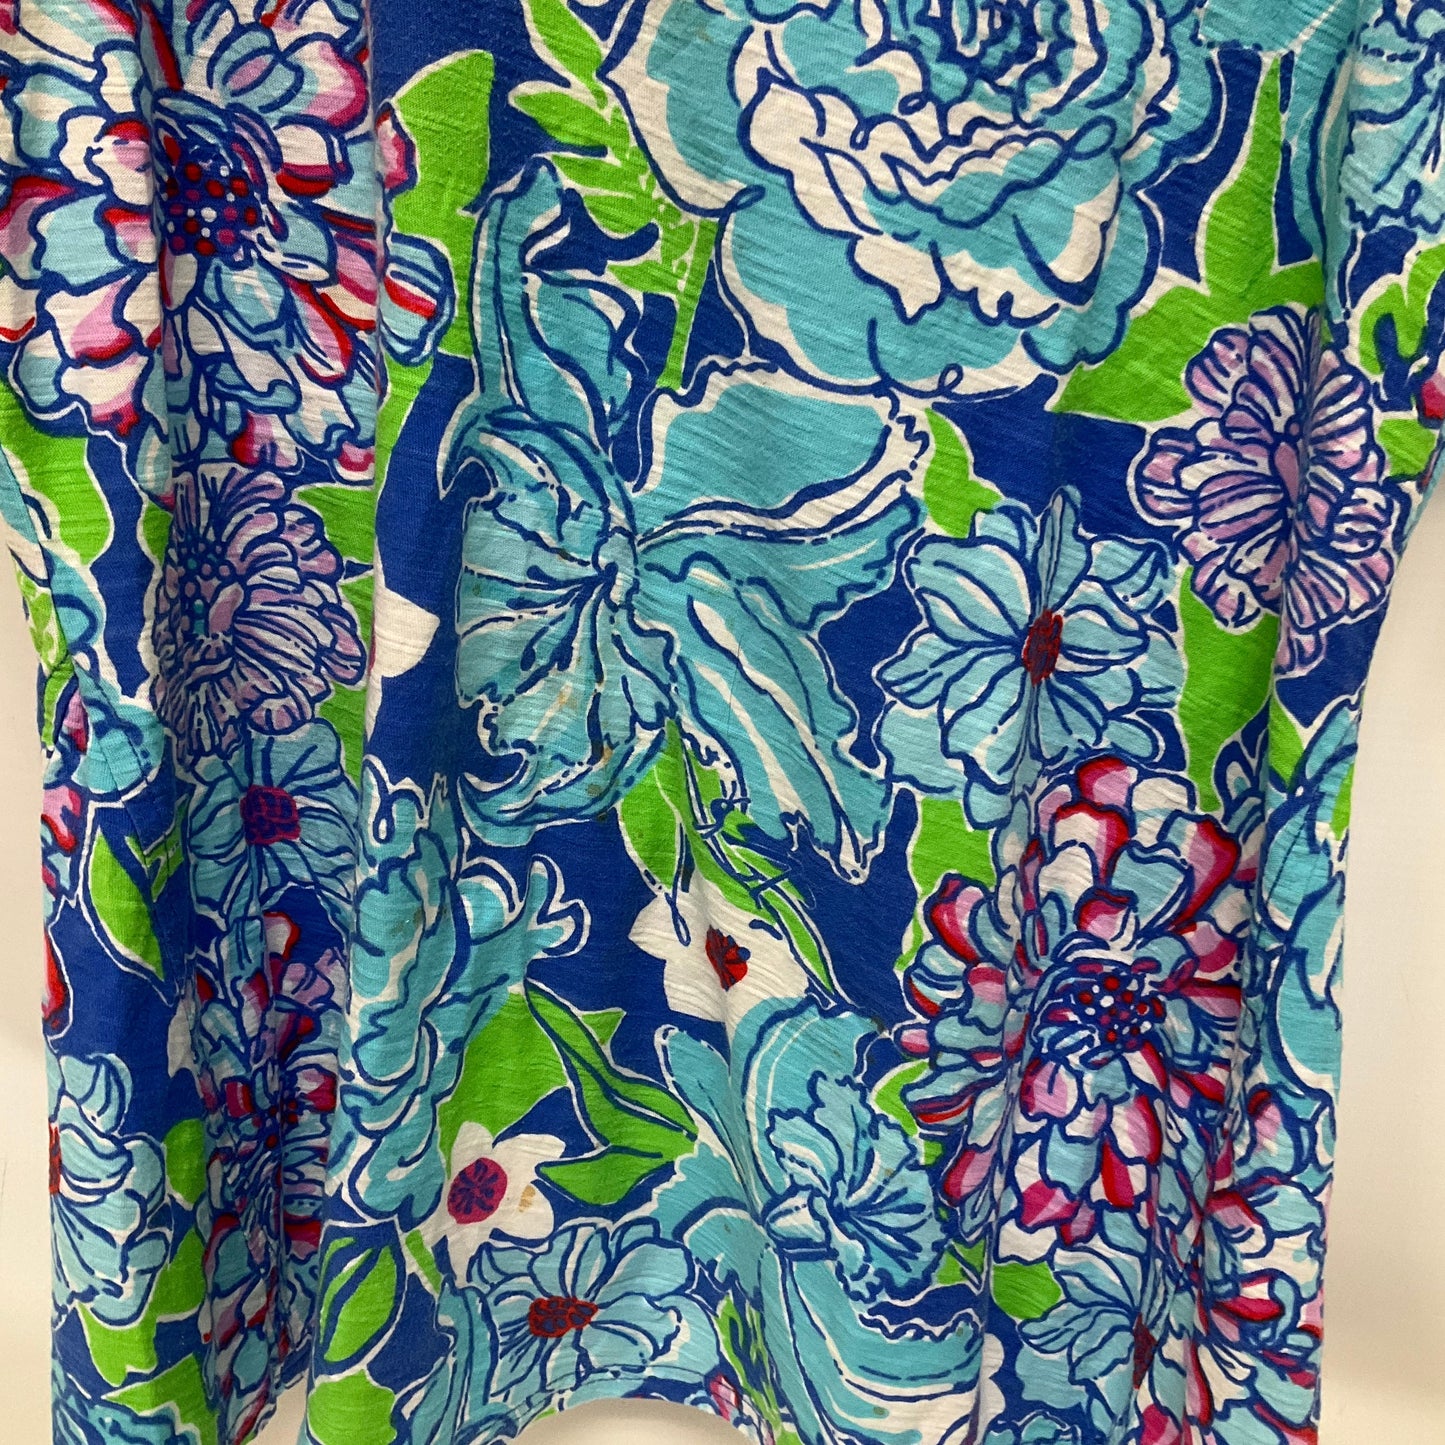 Top Sleeveless By Lilly Pulitzer  Size: S